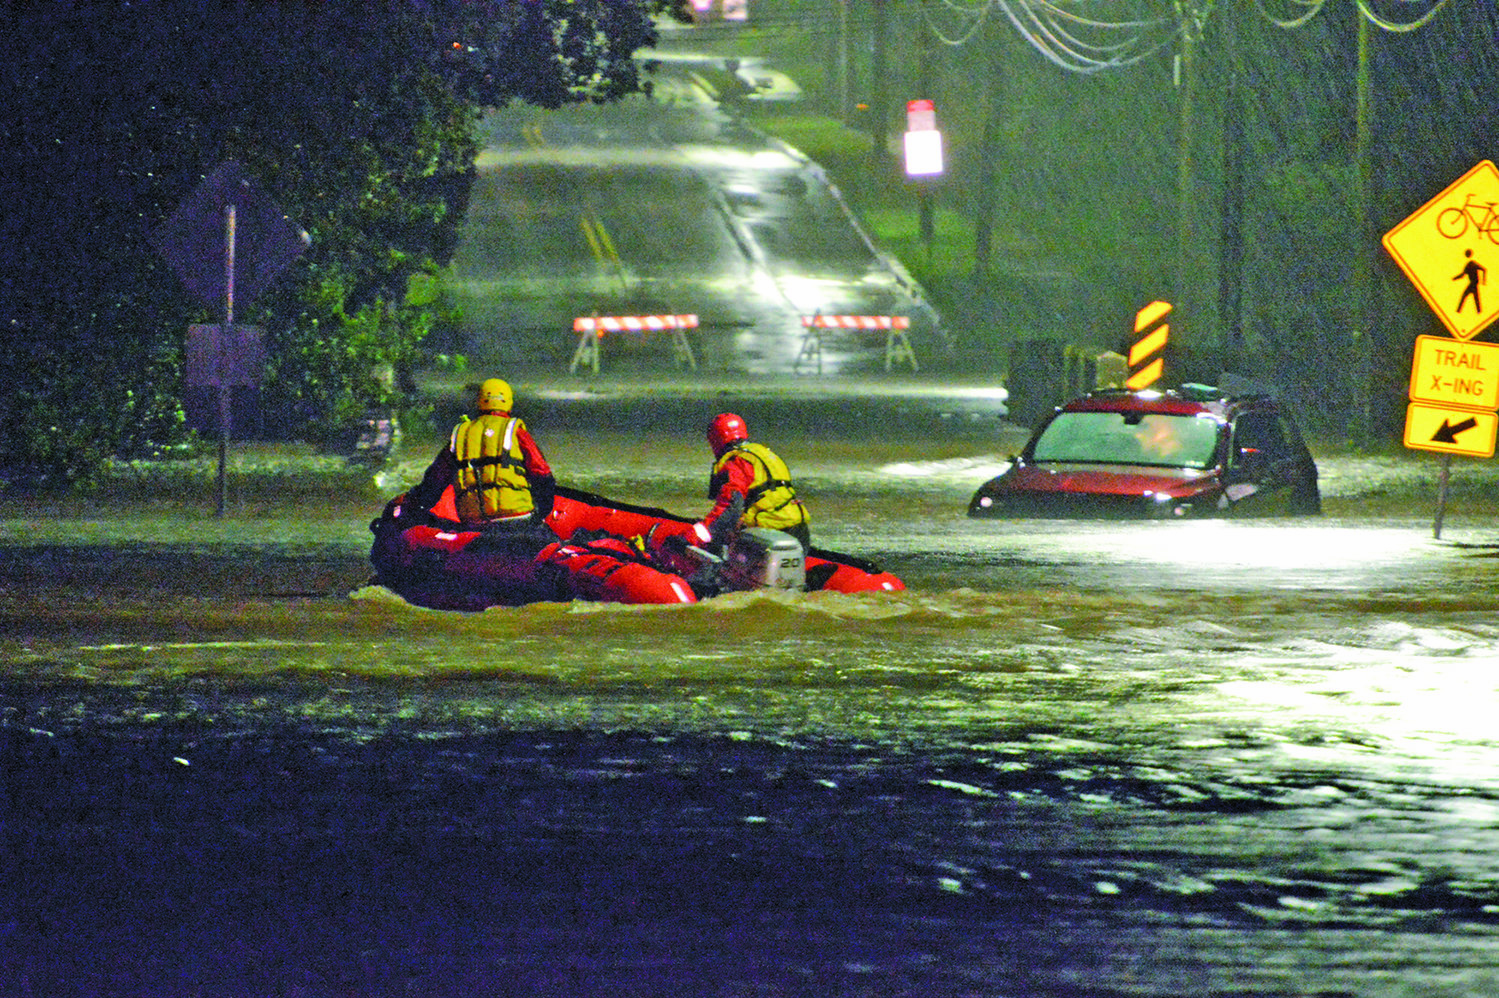 The Bucks County Technical Rescue Task Force, joined by Perkasie and Lower Southampton fire departments, take part in a water rescue caused by flooding from the East Branch of the Perkiomen Creek at Callowhill Road and Dorchester Lane, Perkasie.